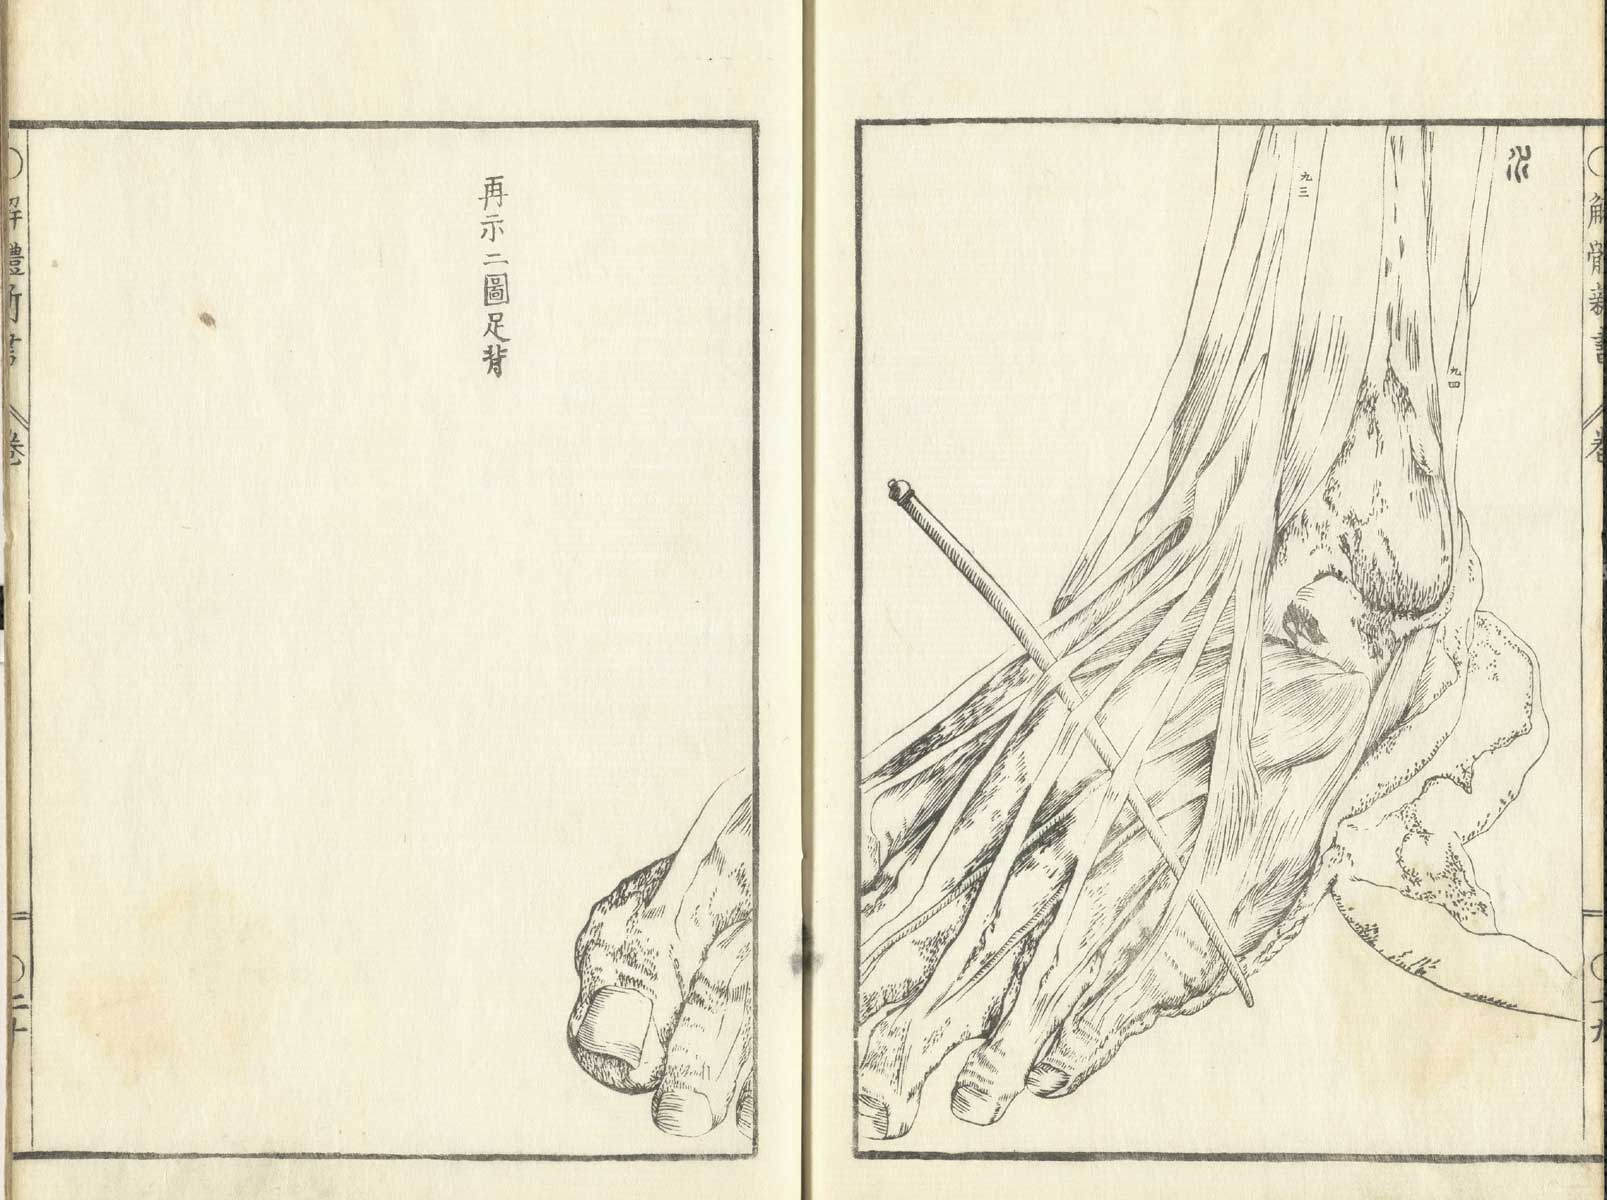 Pages 19 and 20 of Johann Adam Kulmus' Kaitai shinsho, featuring the muscles and tendons of a flayed left foot illustrated across both pages.